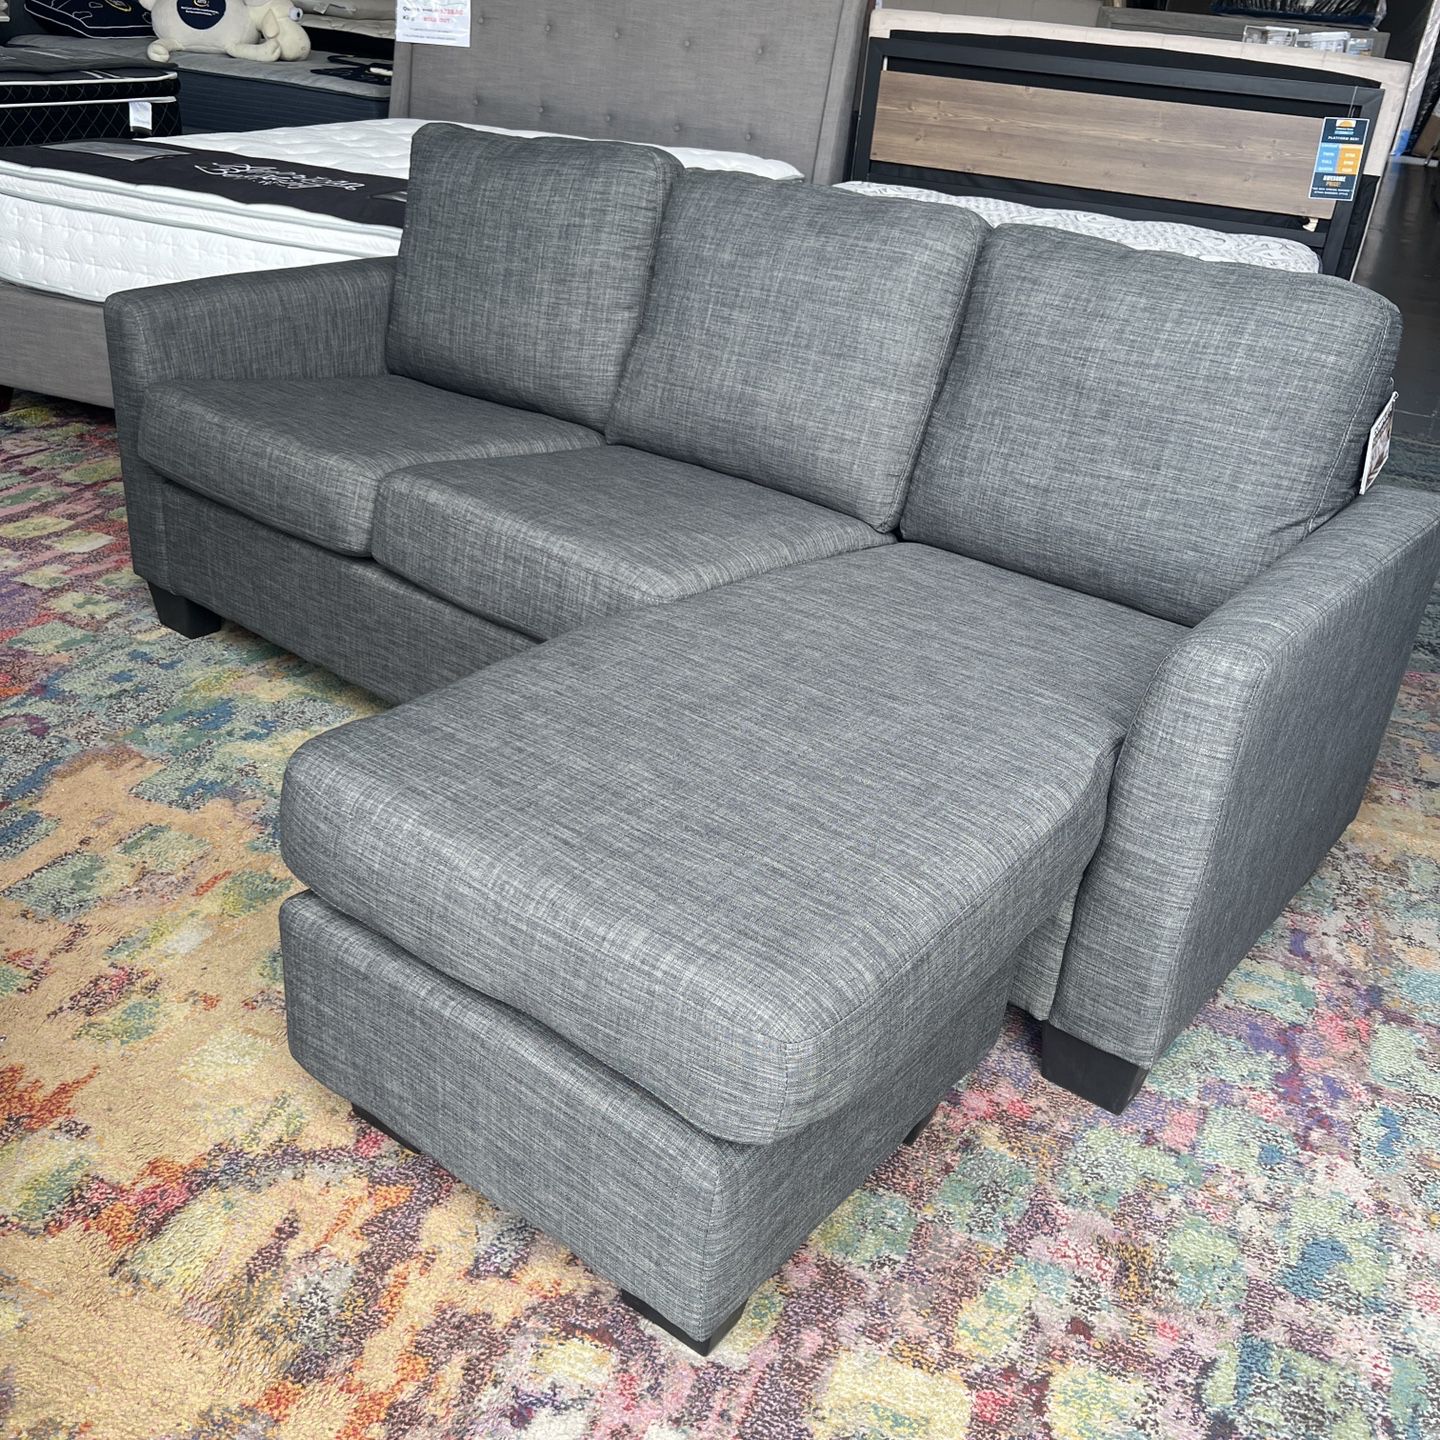 BRAND NEW- In The Box Charcoal Sectional With Reversible Chaise Great price 